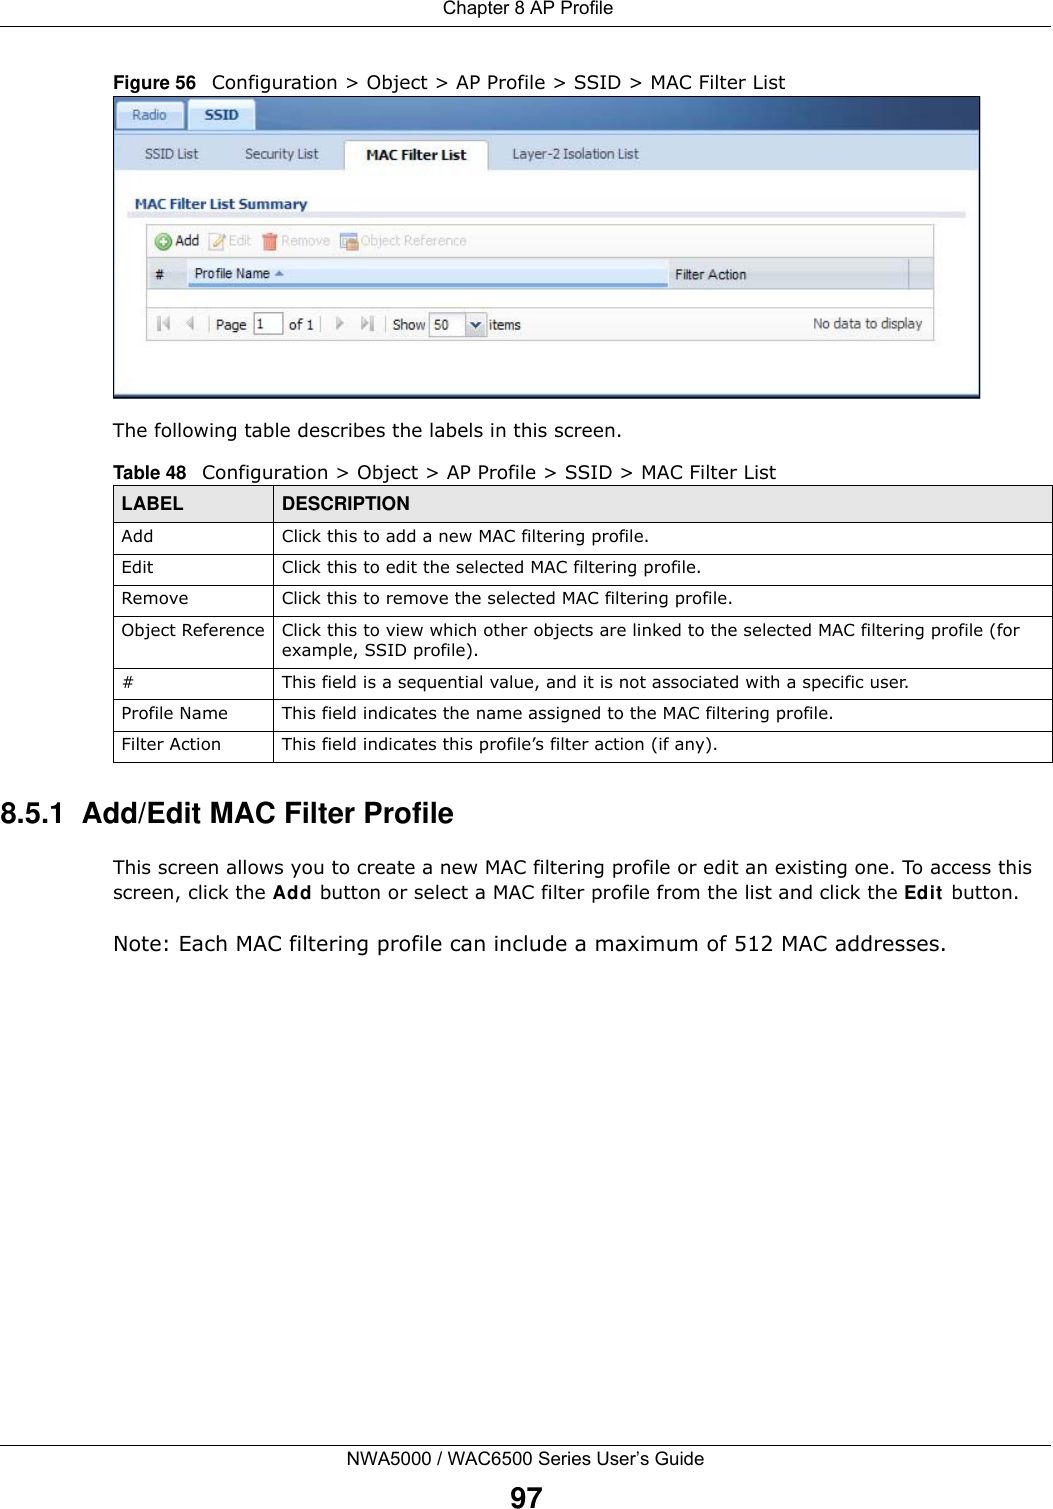  Chapter 8 AP ProfileNWA5000 / WAC6500 Series User’s Guide97Figure 56   Configuration &gt; Object &gt; AP Profile &gt; SSID &gt; MAC Filter ListThe following table describes the labels in this screen.  8.5.1  Add/Edit MAC Filter ProfileThis screen allows you to create a new MAC filtering profile or edit an existing one. To access this screen, click the Add button or select a MAC filter profile from the list and click the Edit  button.Note: Each MAC filtering profile can include a maximum of 512 MAC addresses.Table 48   Configuration &gt; Object &gt; AP Profile &gt; SSID &gt; MAC Filter ListLABEL DESCRIPTIONAdd Click this to add a new MAC filtering profile.Edit Click this to edit the selected MAC filtering profile.Remove Click this to remove the selected MAC filtering profile.Object Reference Click this to view which other objects are linked to the selected MAC filtering profile (for example, SSID profile).# This field is a sequential value, and it is not associated with a specific user.Profile Name This field indicates the name assigned to the MAC filtering profile.Filter Action This field indicates this profile’s filter action (if any).